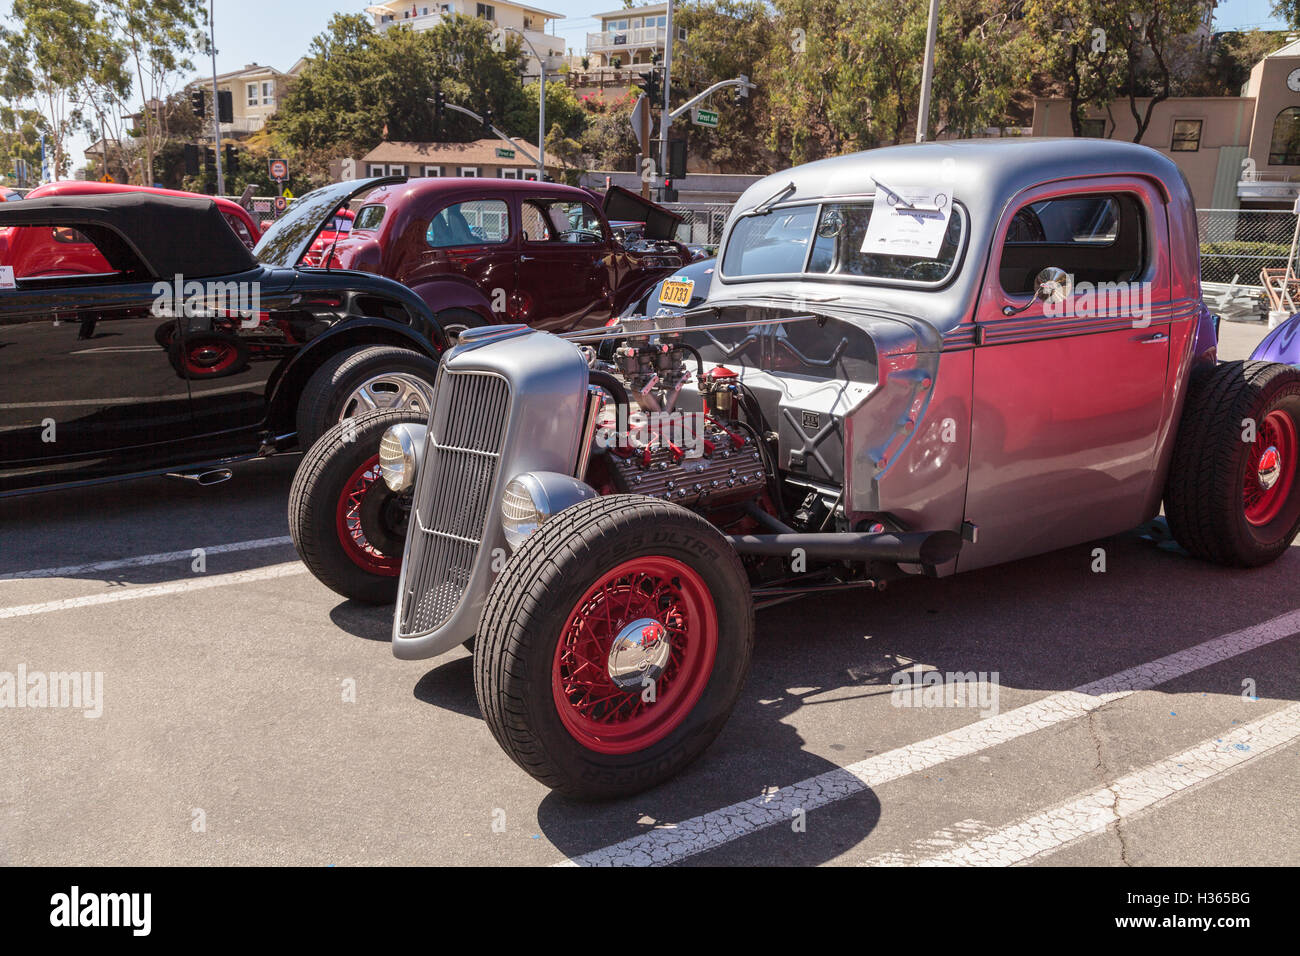 Laguna Beach, CA, USA - October 2, 2016: Silver 1938 Ford Truck Cab Coupe owned by James Valente and displayed at the Rotary Clu Stock Photo